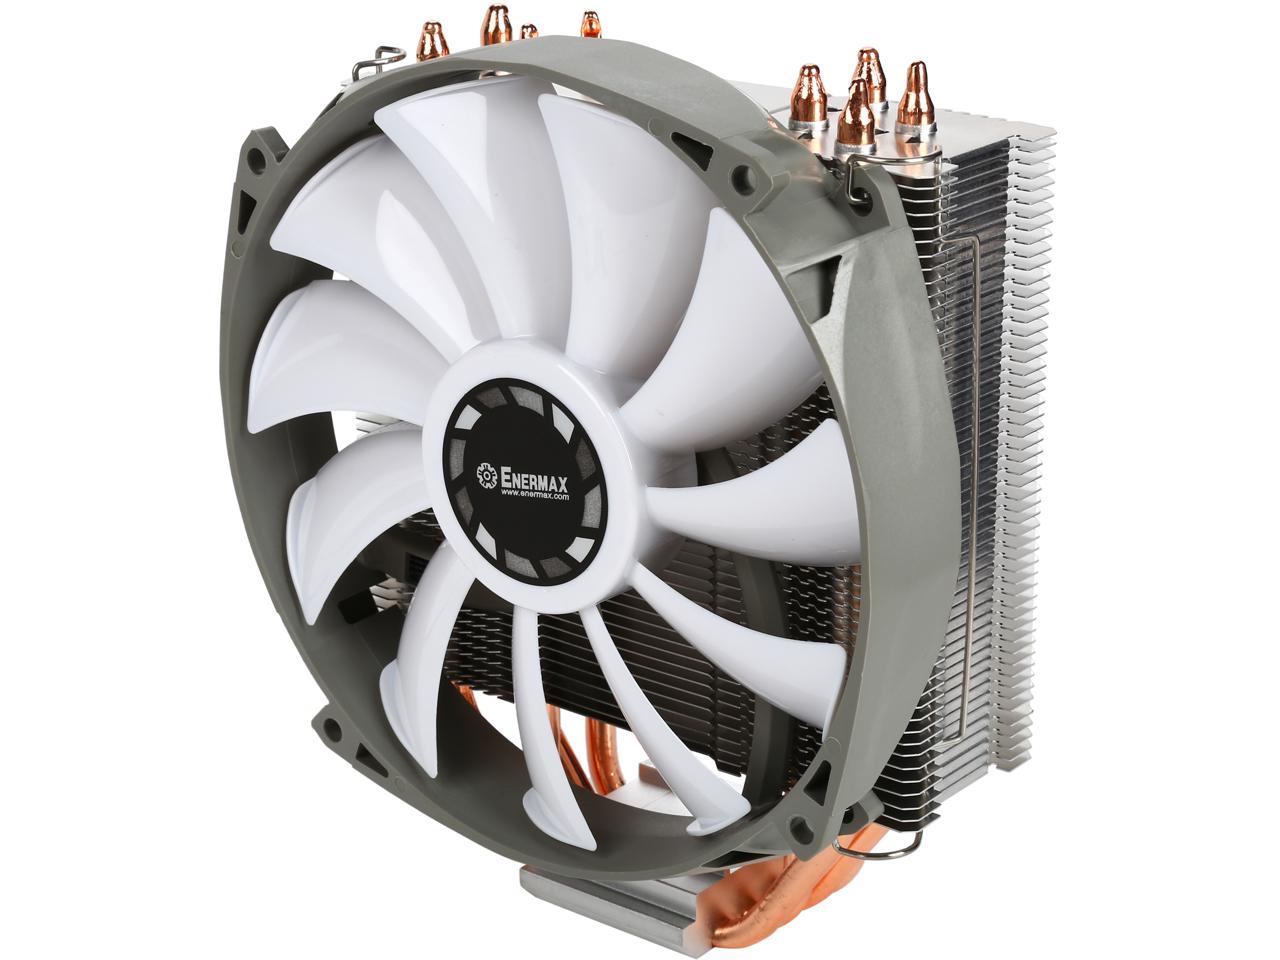 Enermax Ets T40f Tb Fit Series Cpu Cooler 0w Intel Amd 1mm Fan Black Silver Computer Components Fans Cooling